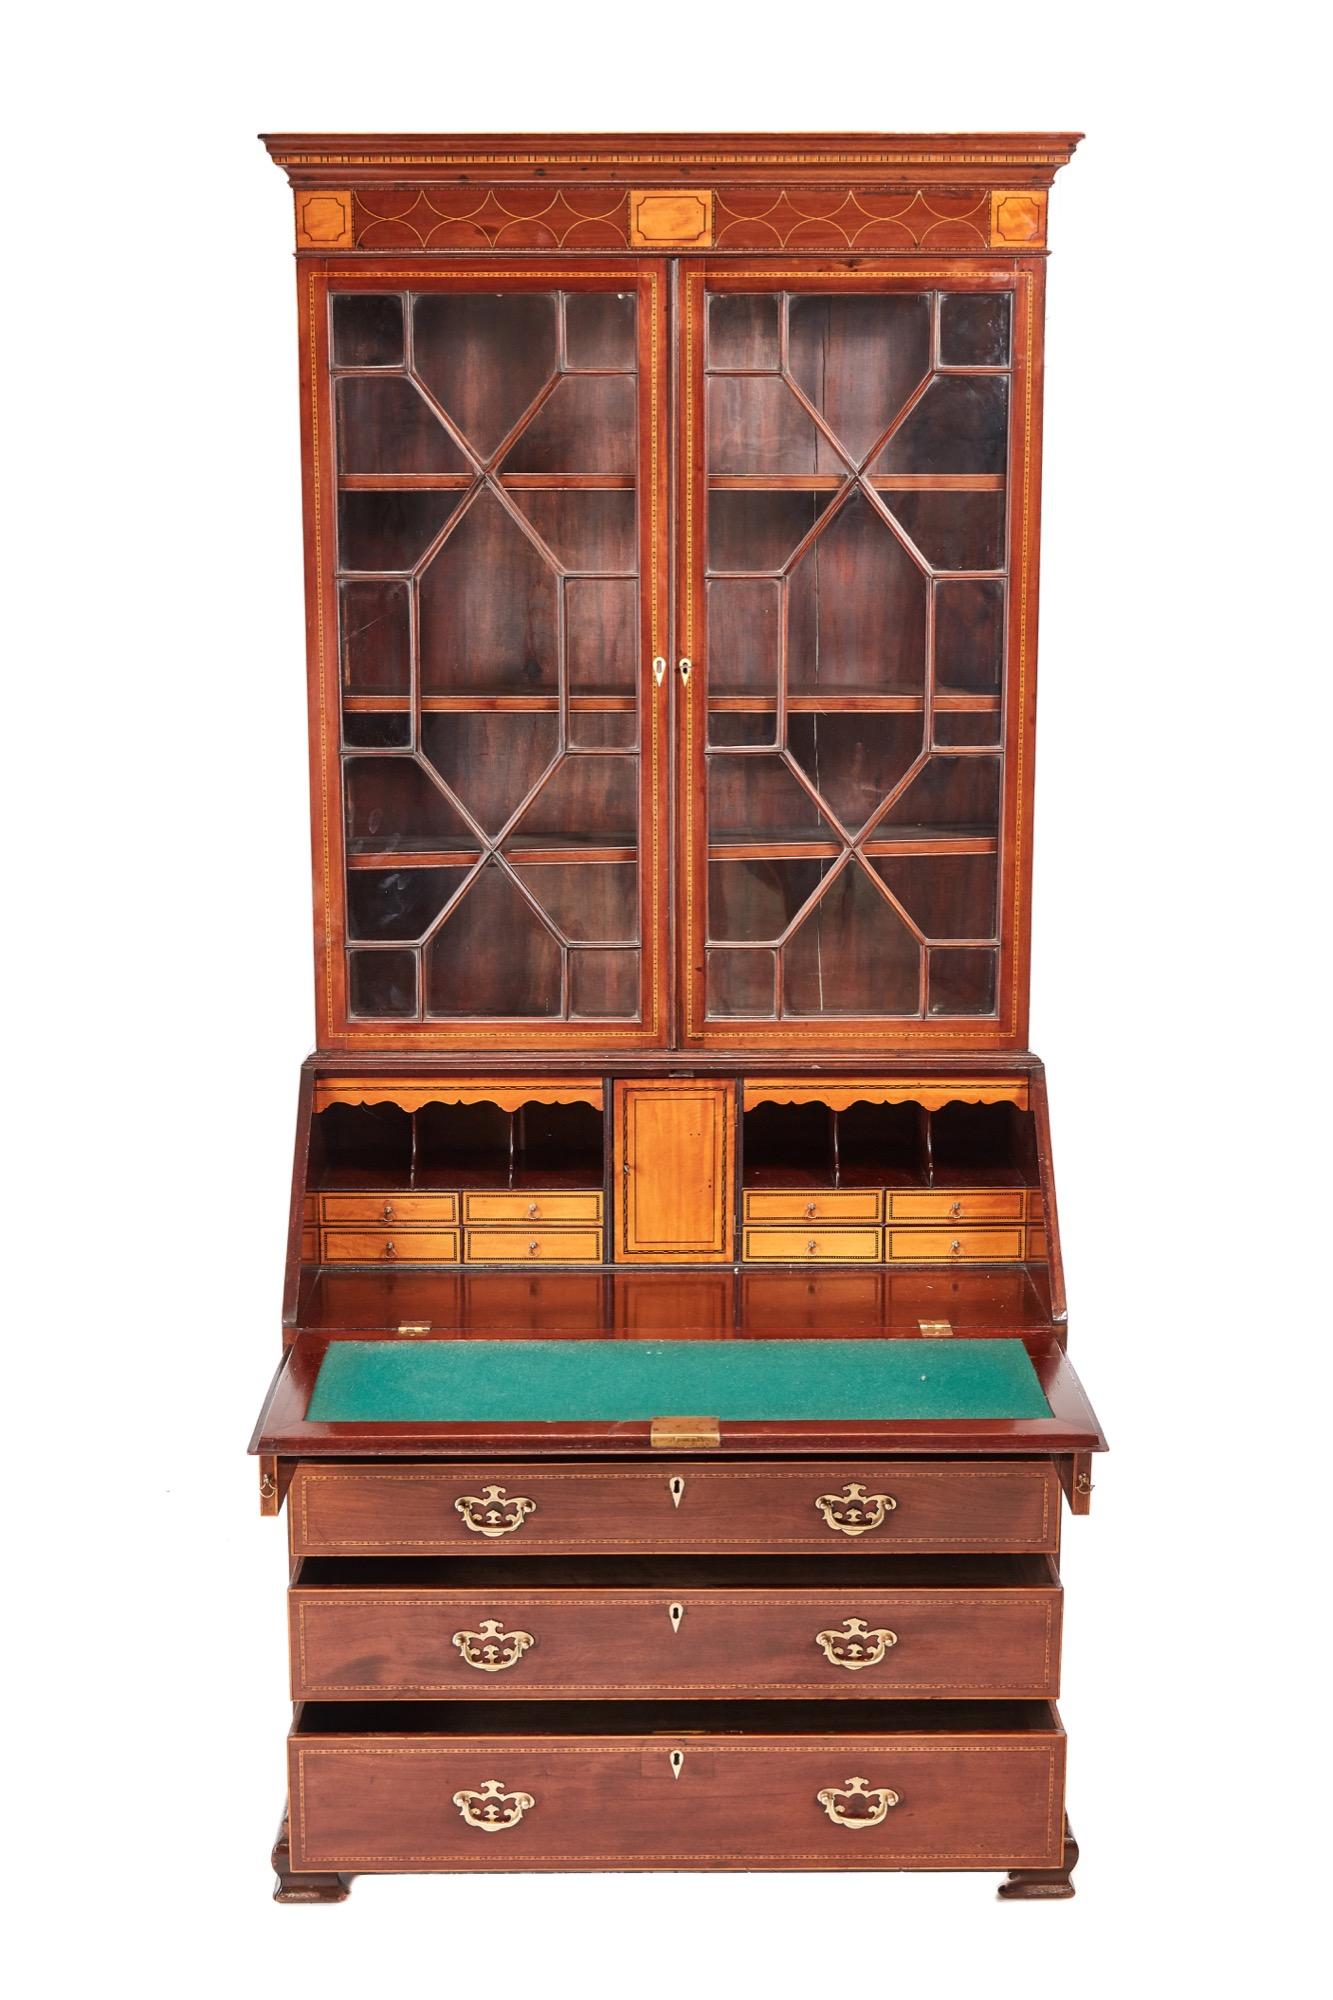 Outstanding George III inlaid mahogany bureau bookcase, the upper section having a shaped mahogany cornice inlaid with satinwood, two astragal glazed doors enclosing three adjustable shelves, the bureau having a mahogany fall inlaid with satinwood,